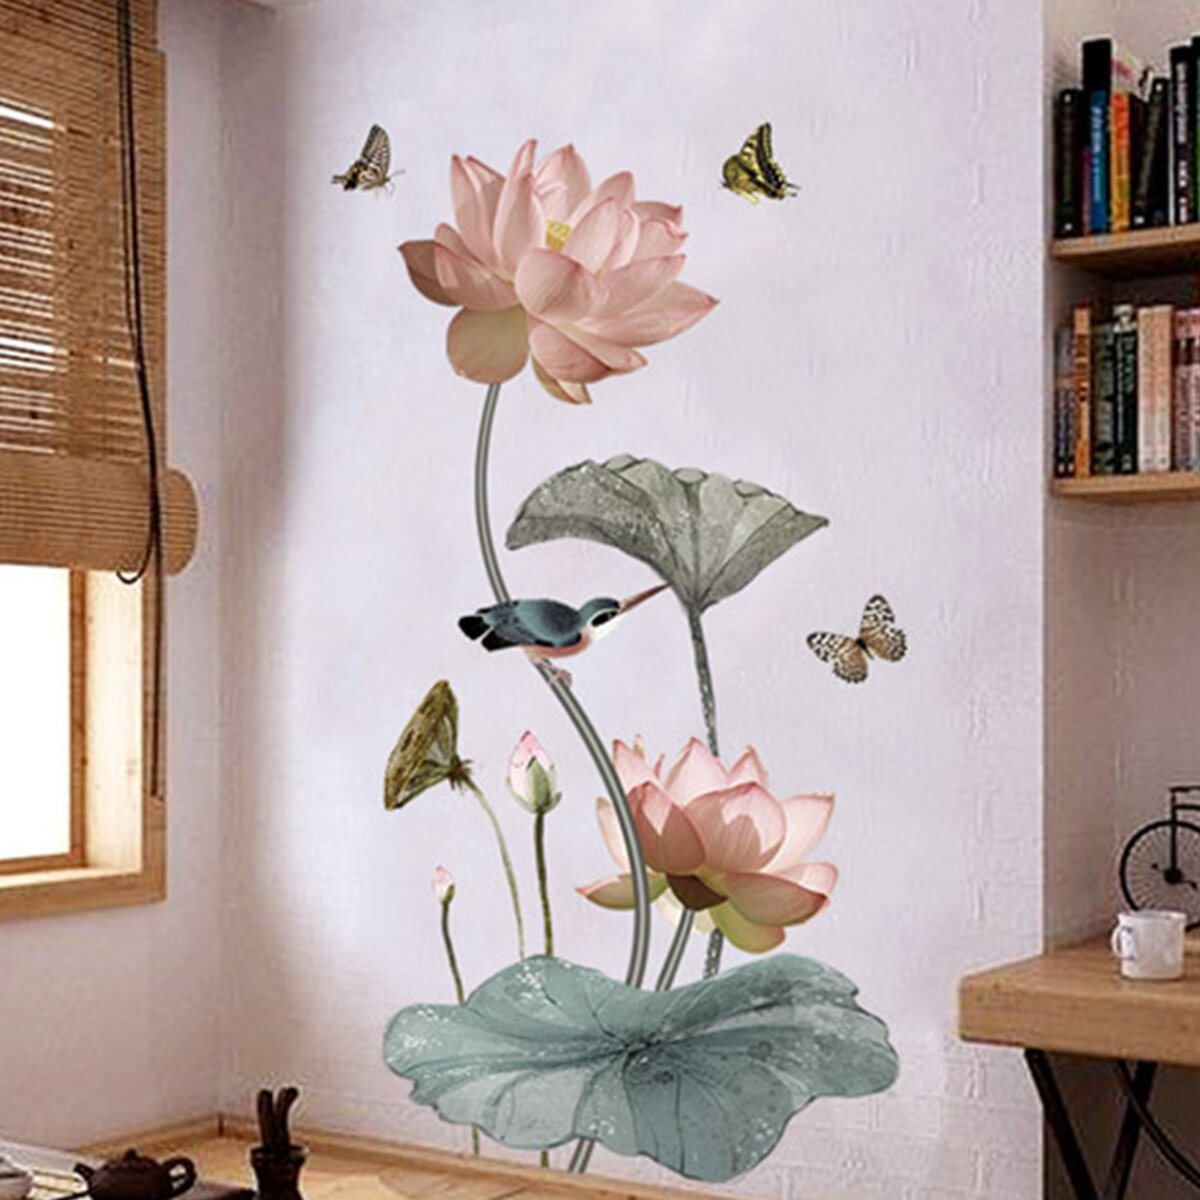 DIY Water Lilies Flower Chinese Calligraphy Wall Stickers Decal Home Decor Art Mural Decals Decor Removable Decal Decora, Banggood  - buy with discount